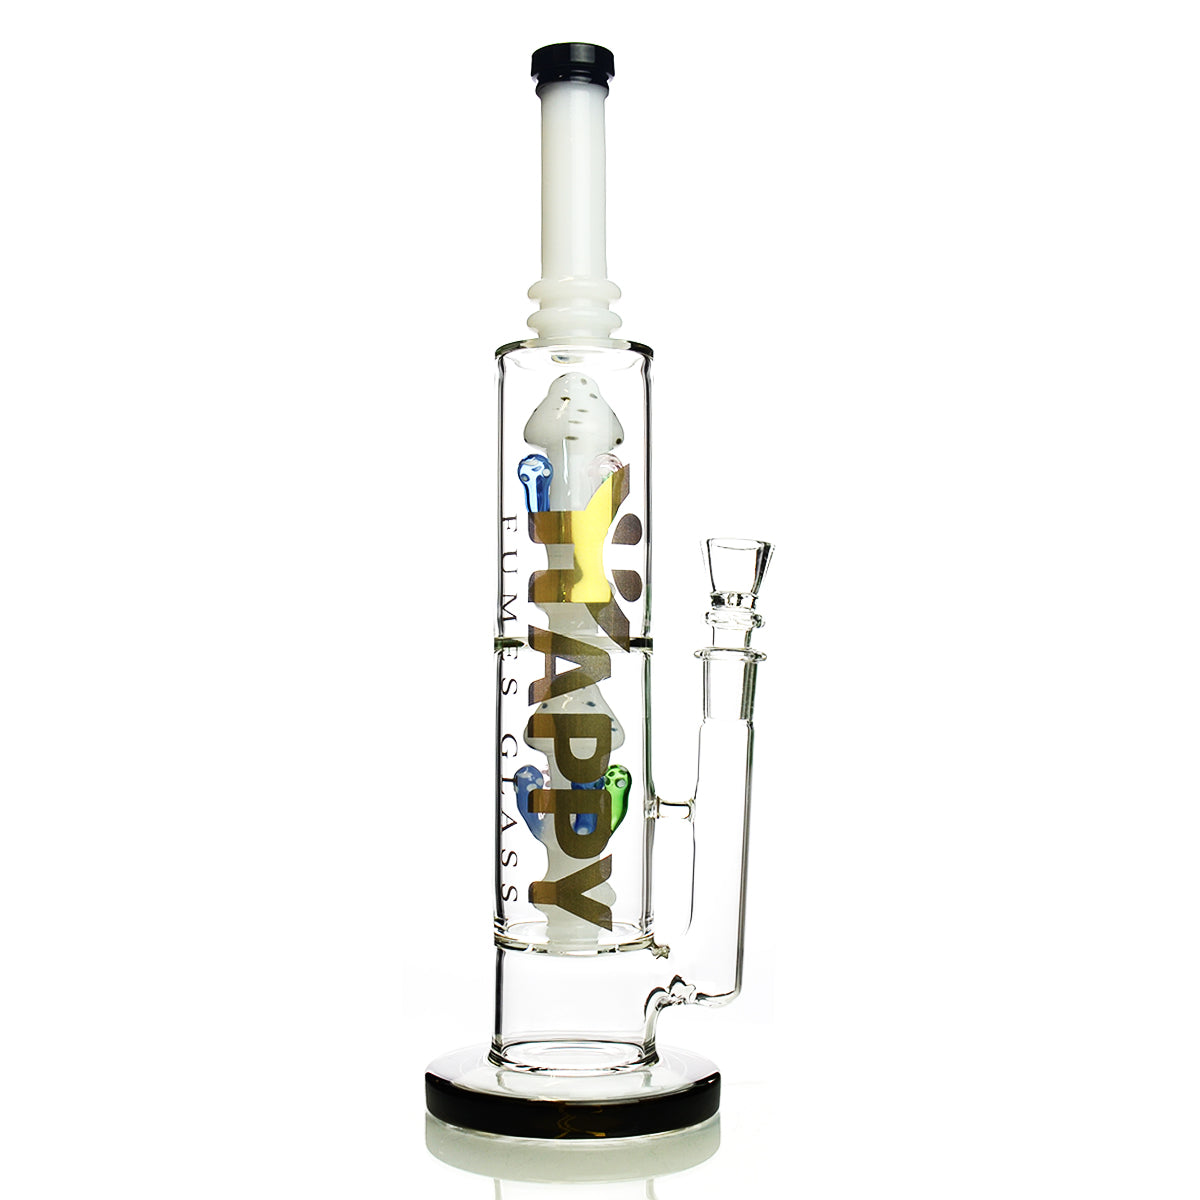 17" Double Mushroom Chamber Water Pipe with 18mm Male Bowl - Happy Fumes Glass Brand